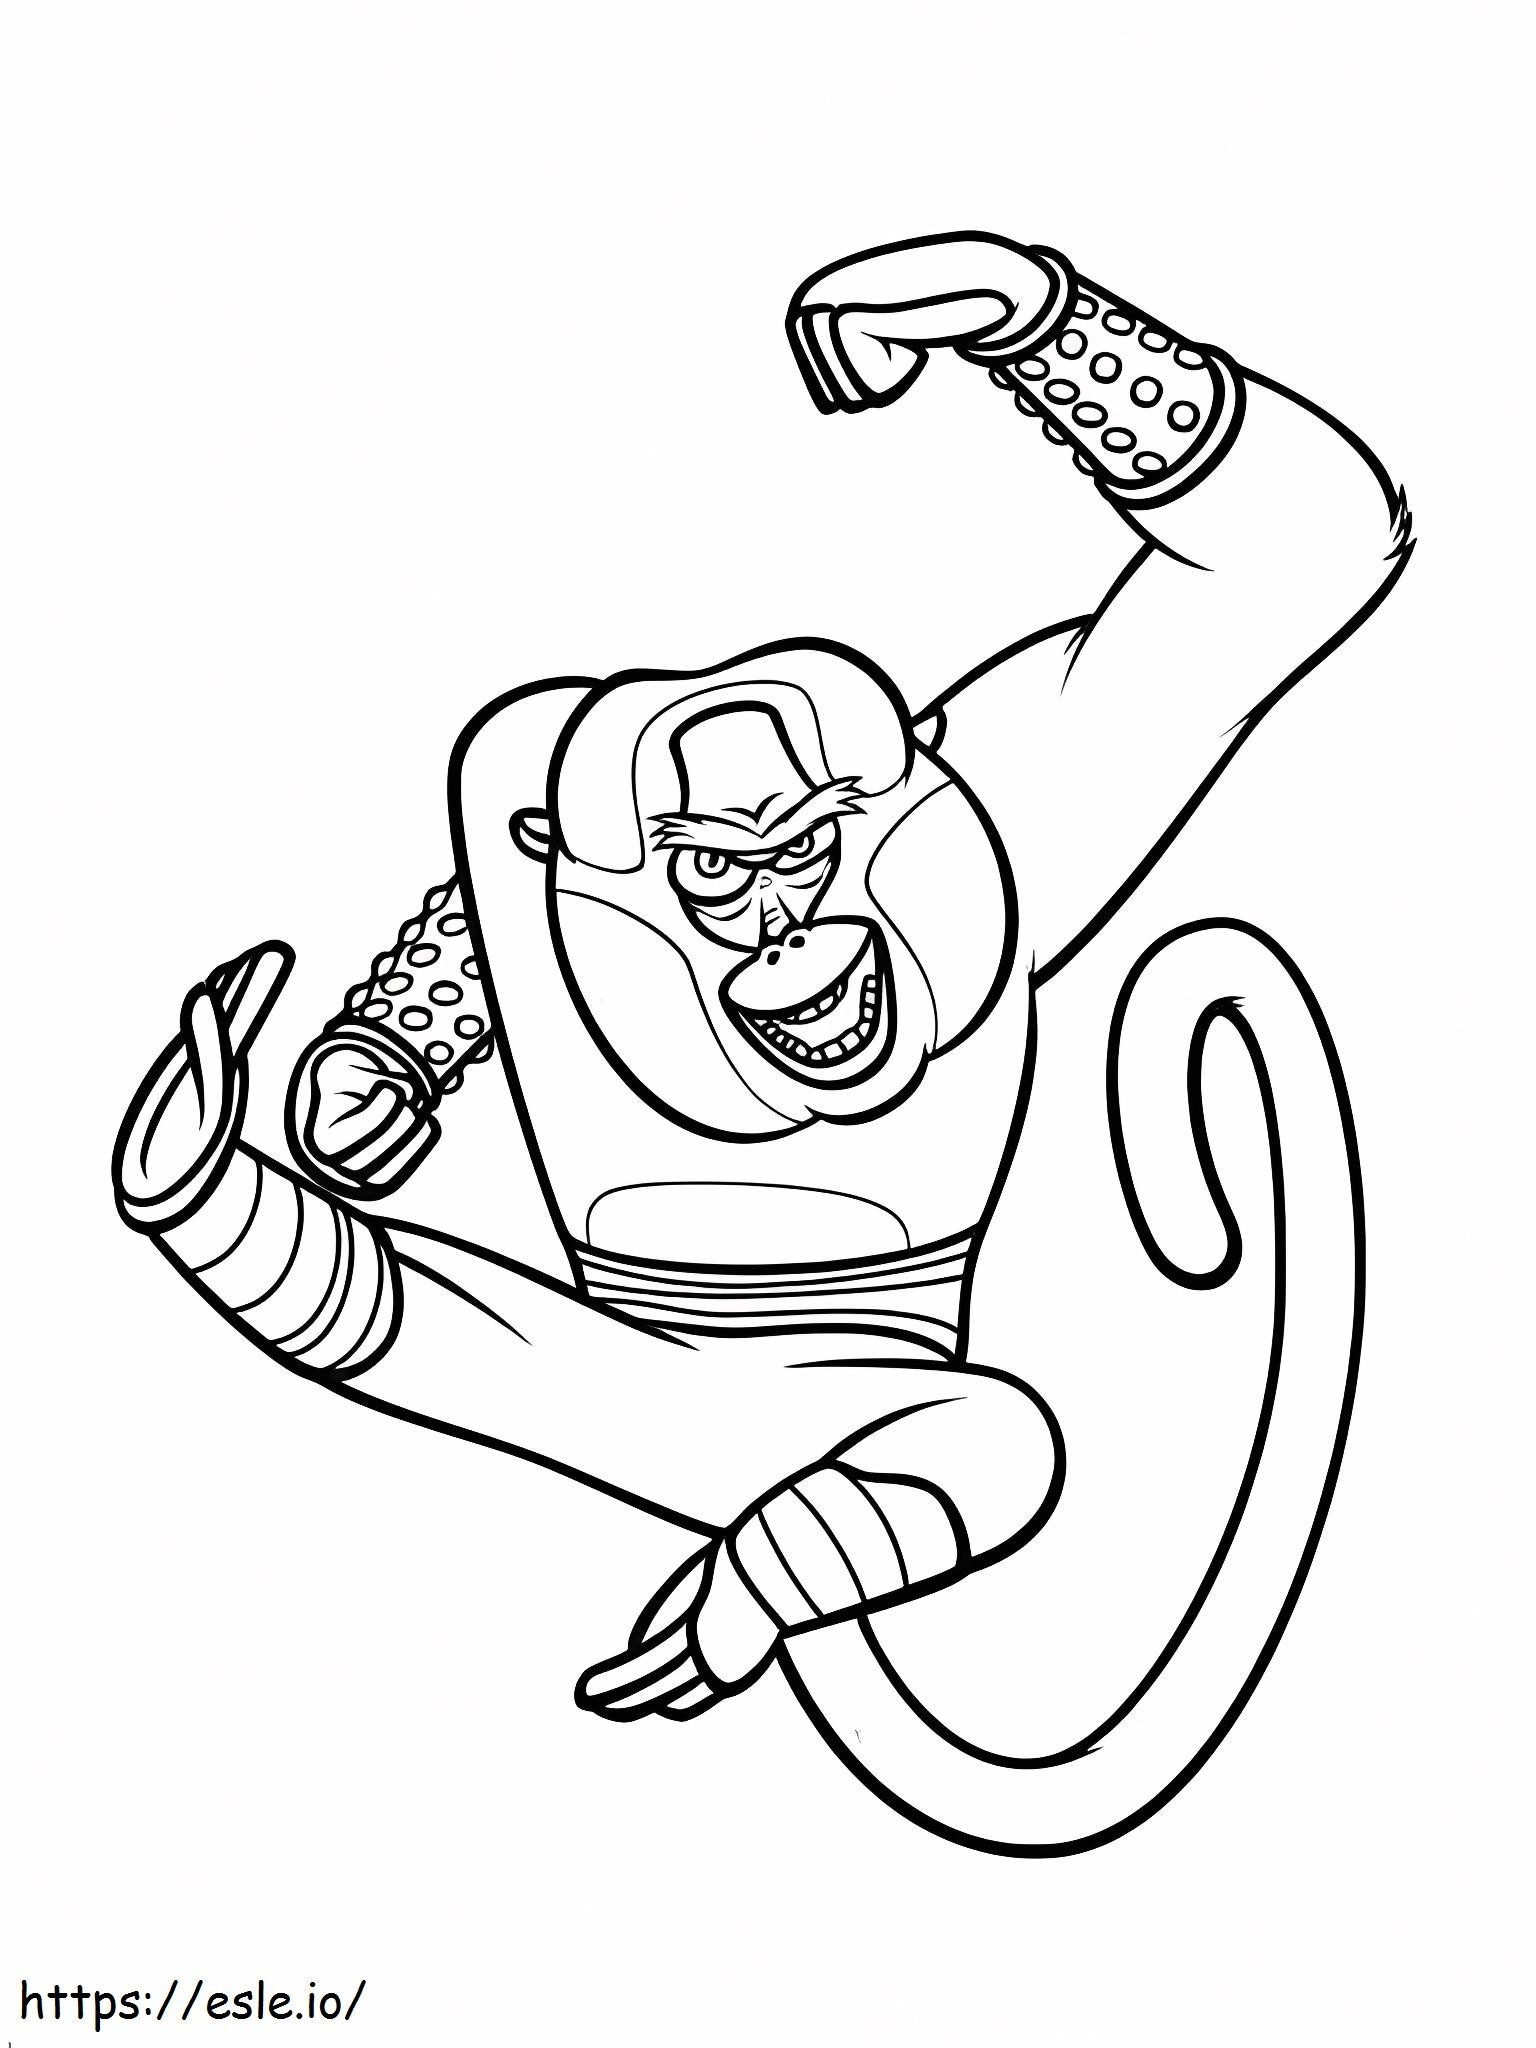 Monkey Master coloring page